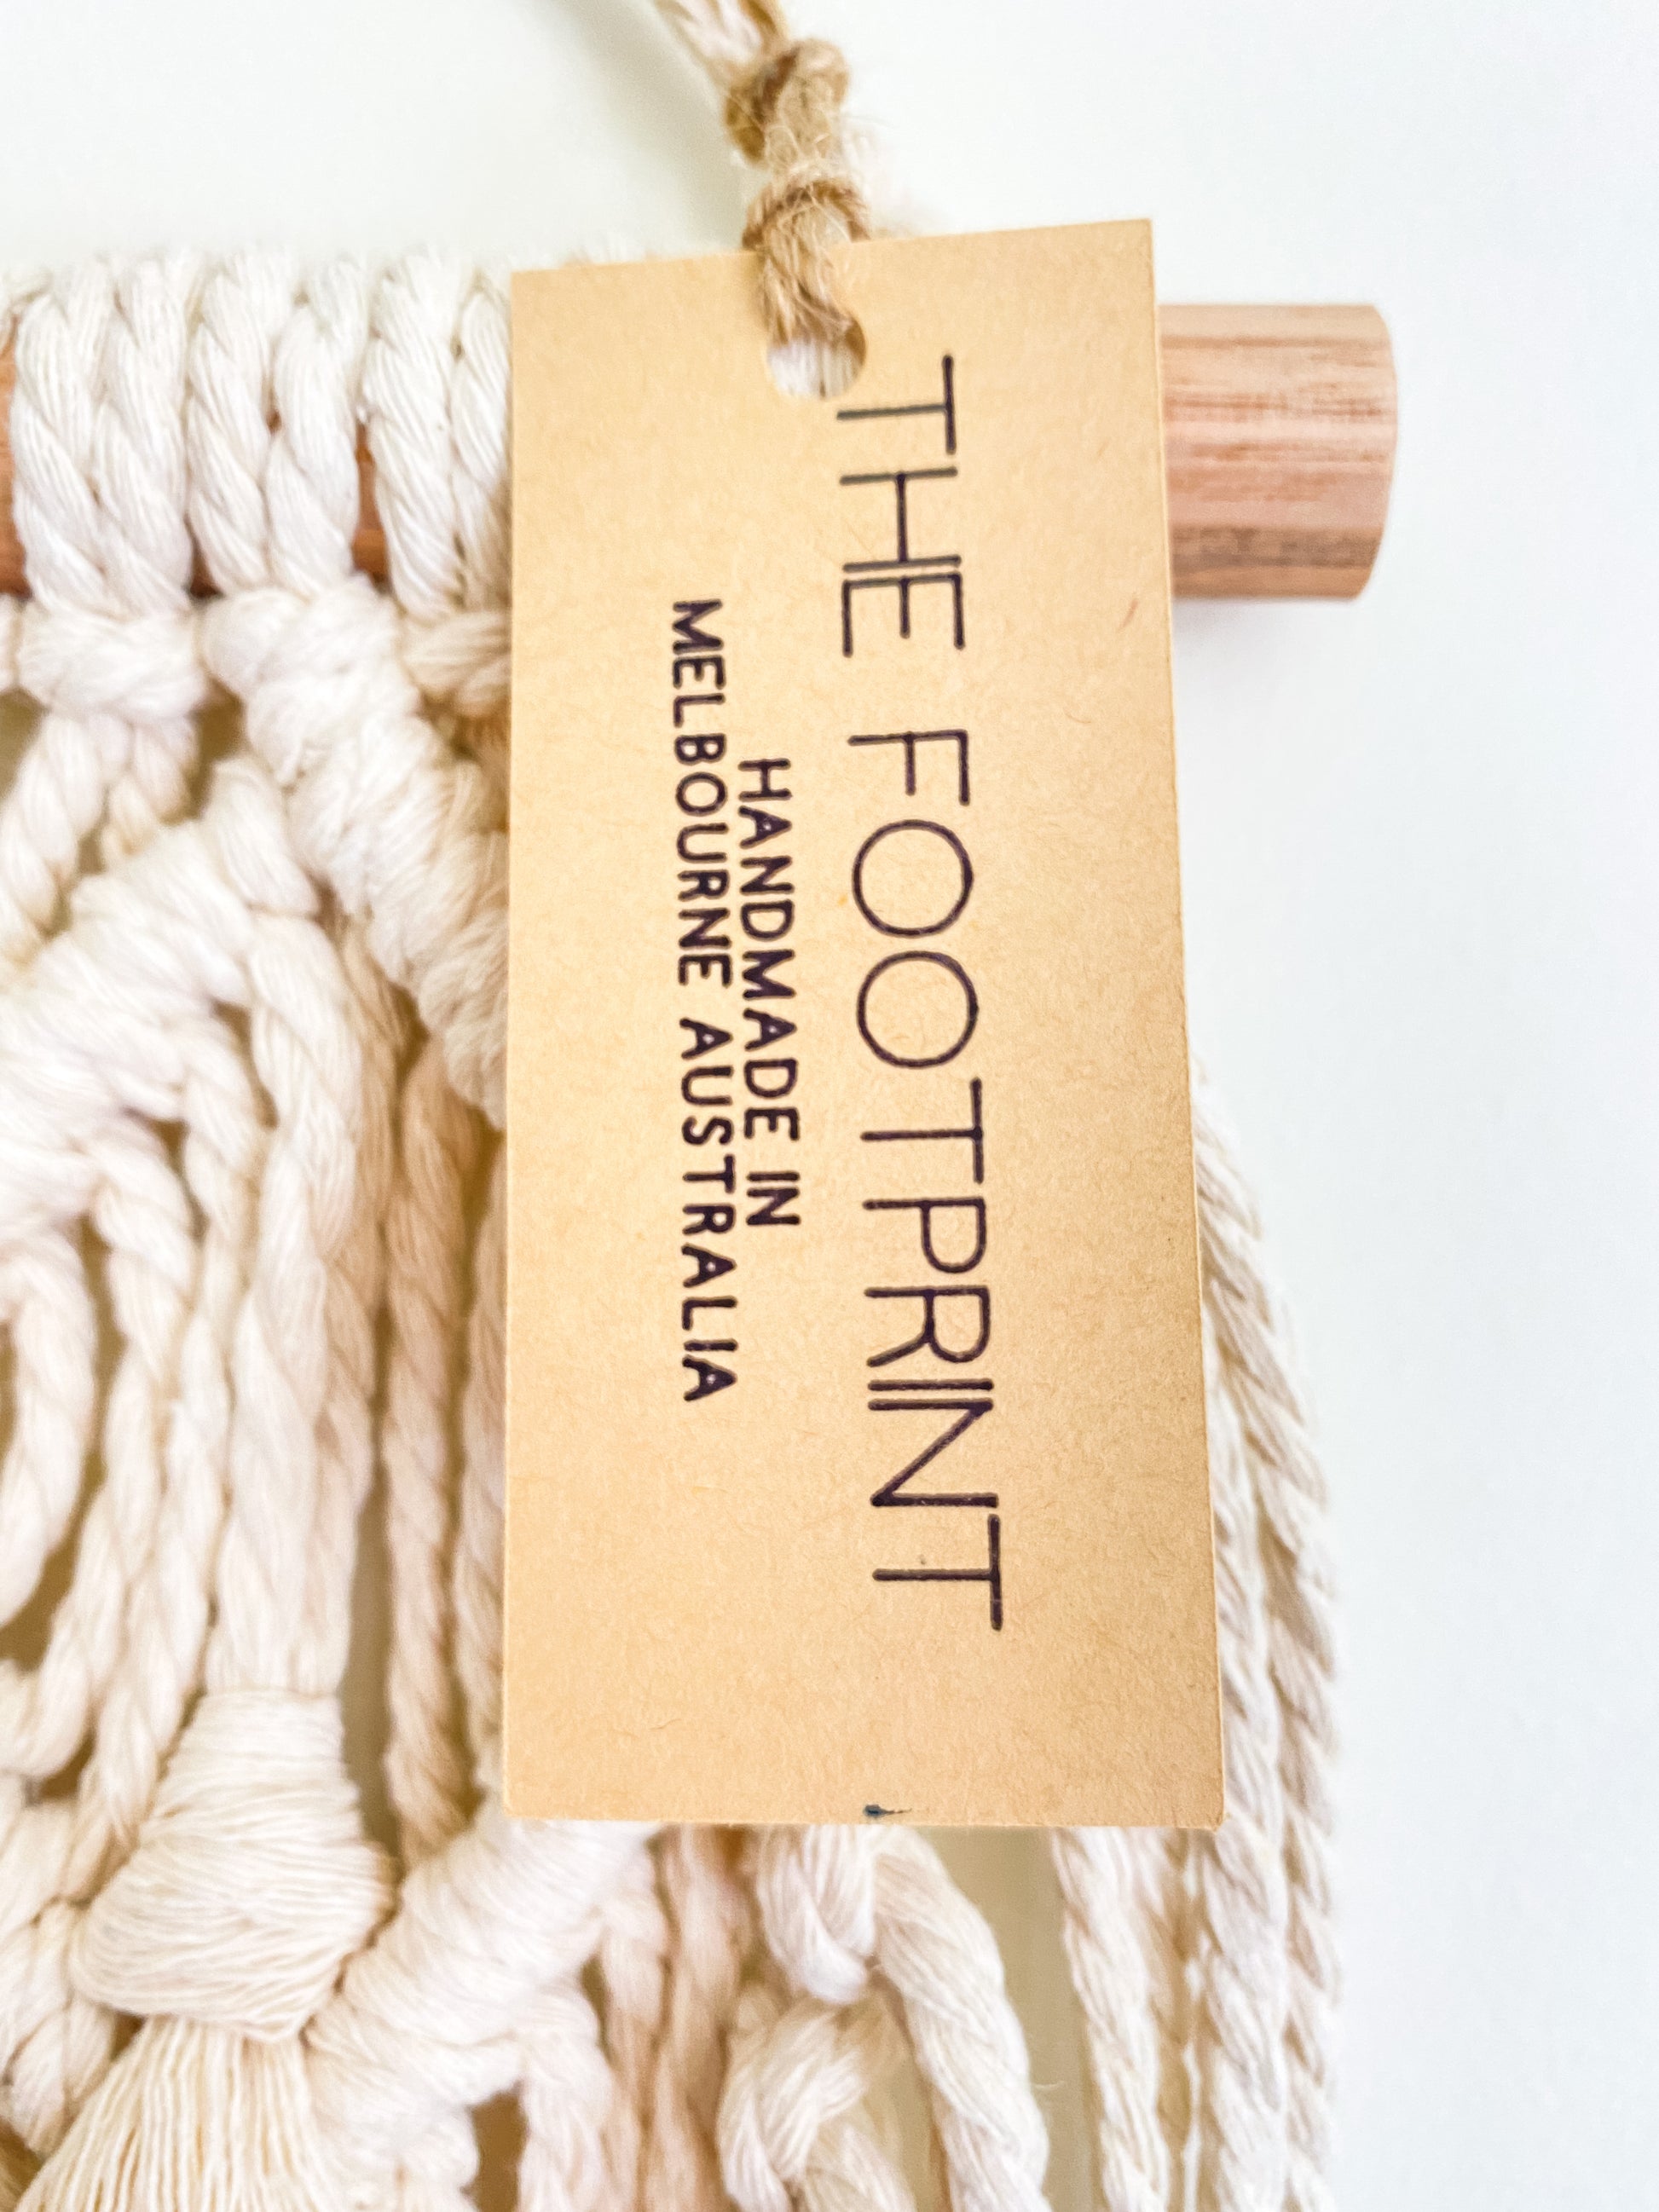 Closeup photo of a natural off white macrame wall hanging with the product tag on. Product tag reads The Footprint handmade in Melbourne, Australia